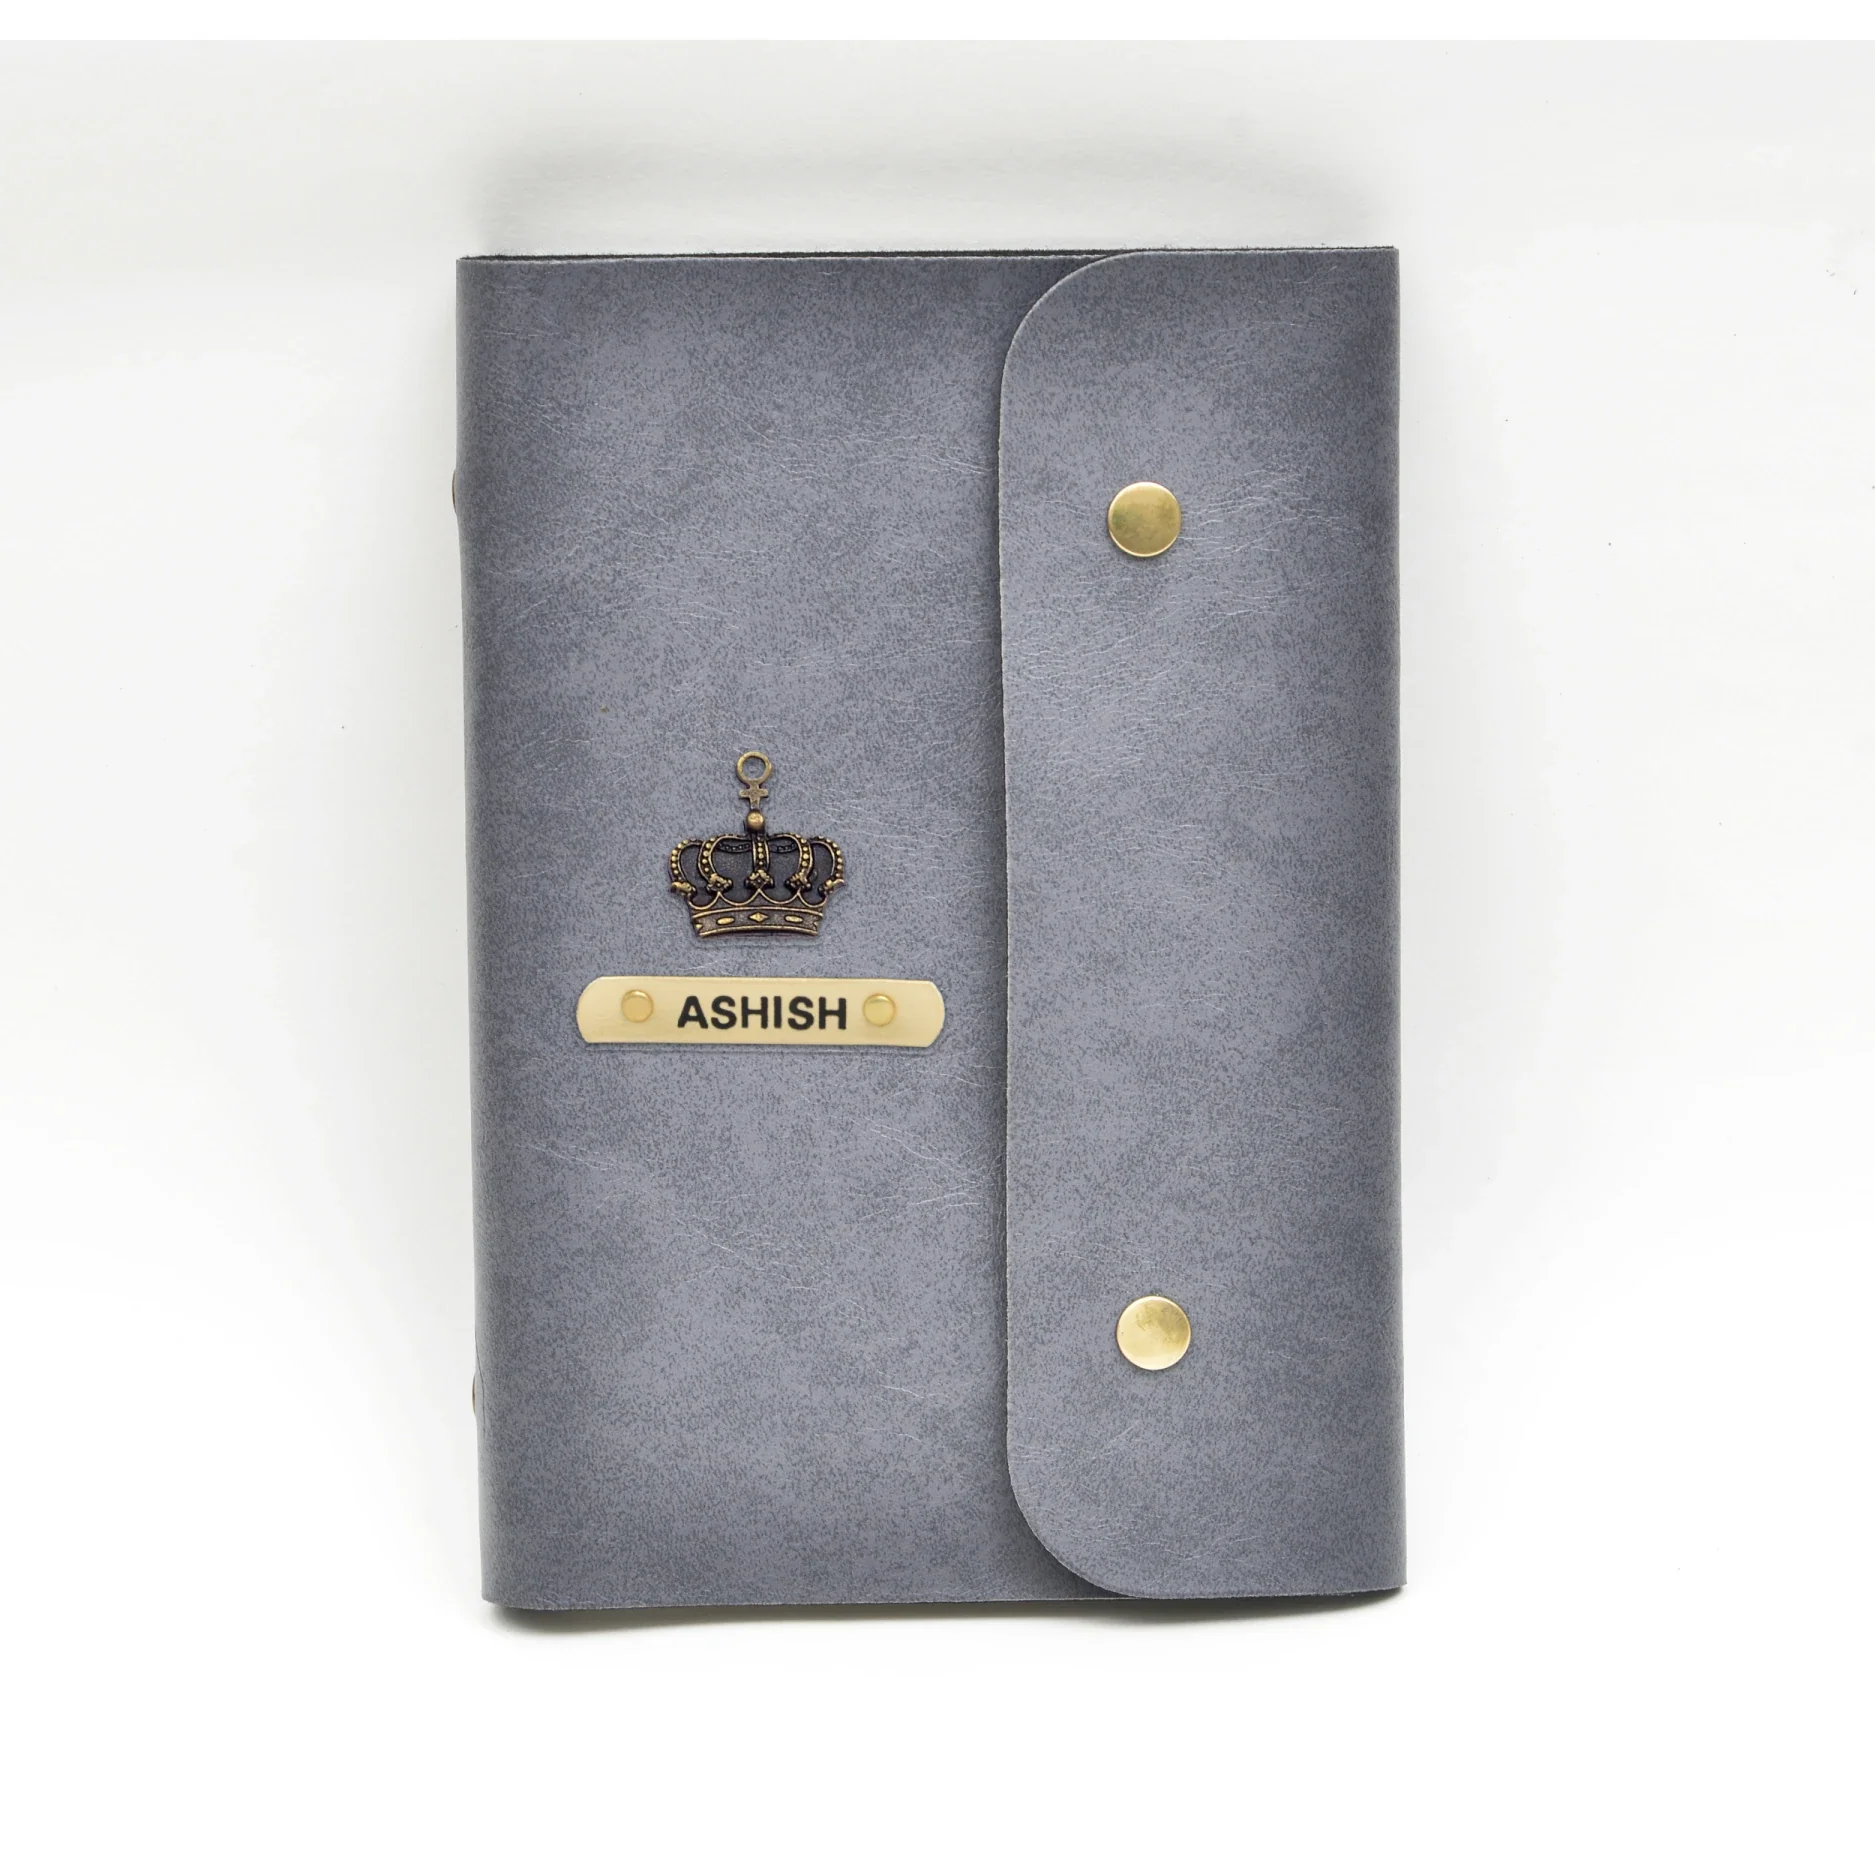 Stay organized and stylish with our personalized leather buttoned diary. With a range of designs to choose from, you can find the one that reflects your personality.